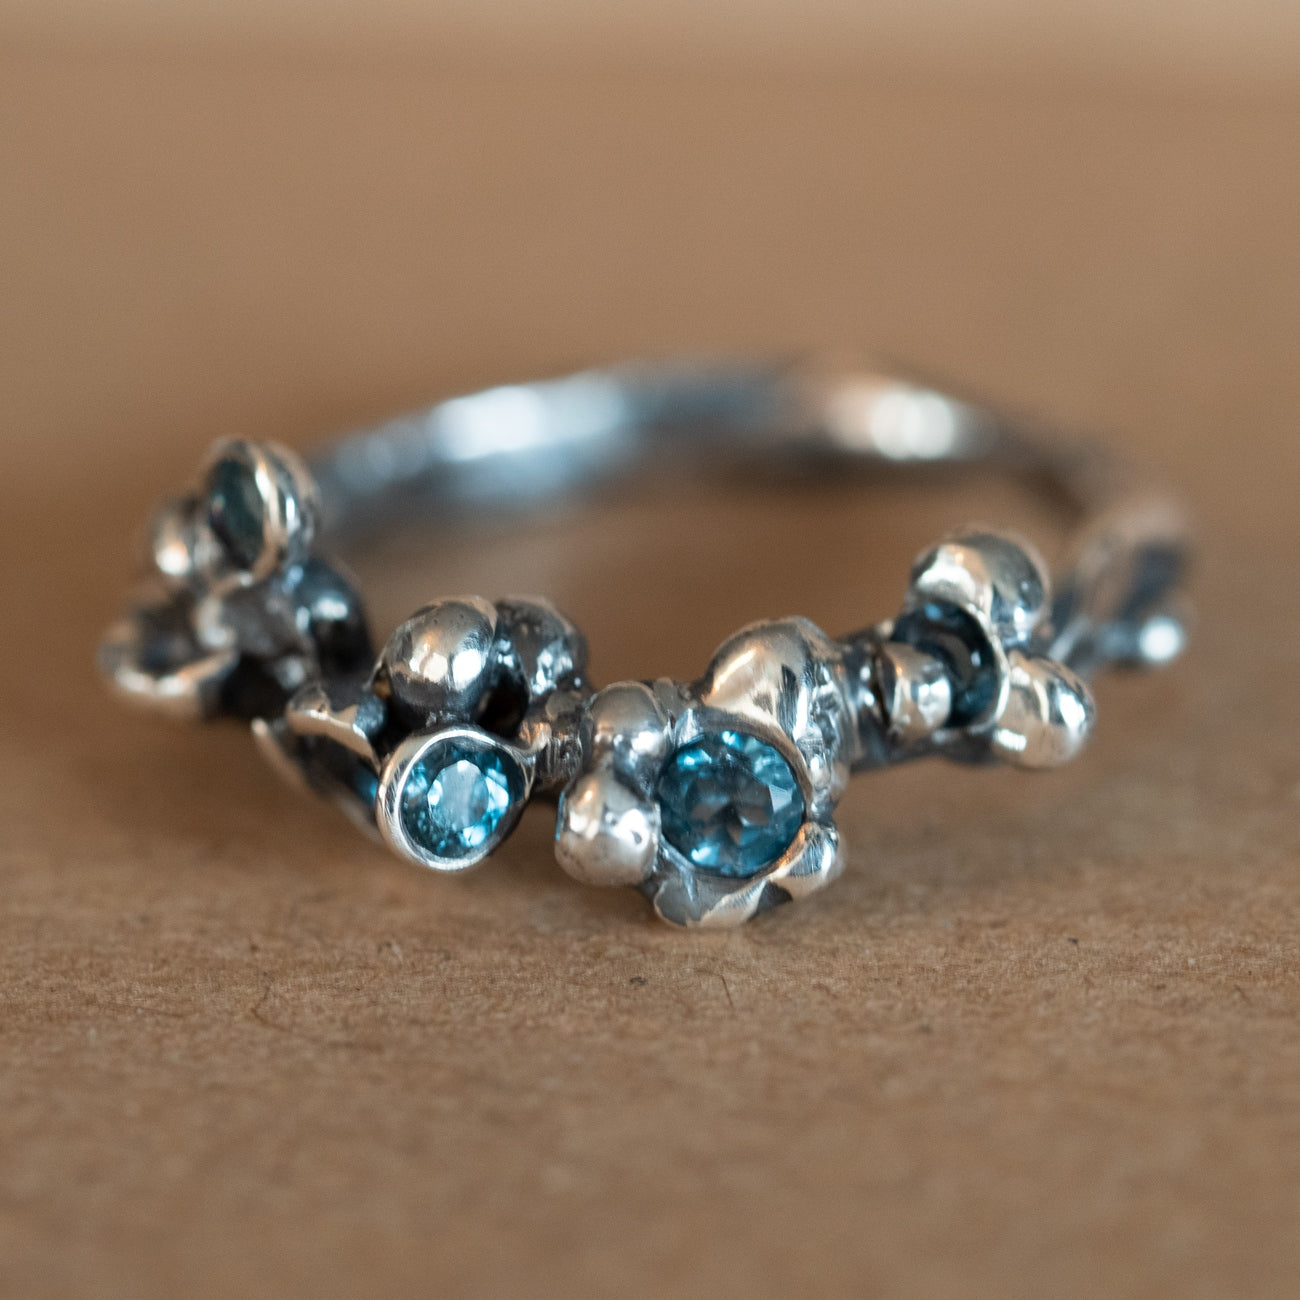 Bobble ring | Oxidised Recycled Sterling Silver with London blue Topaz